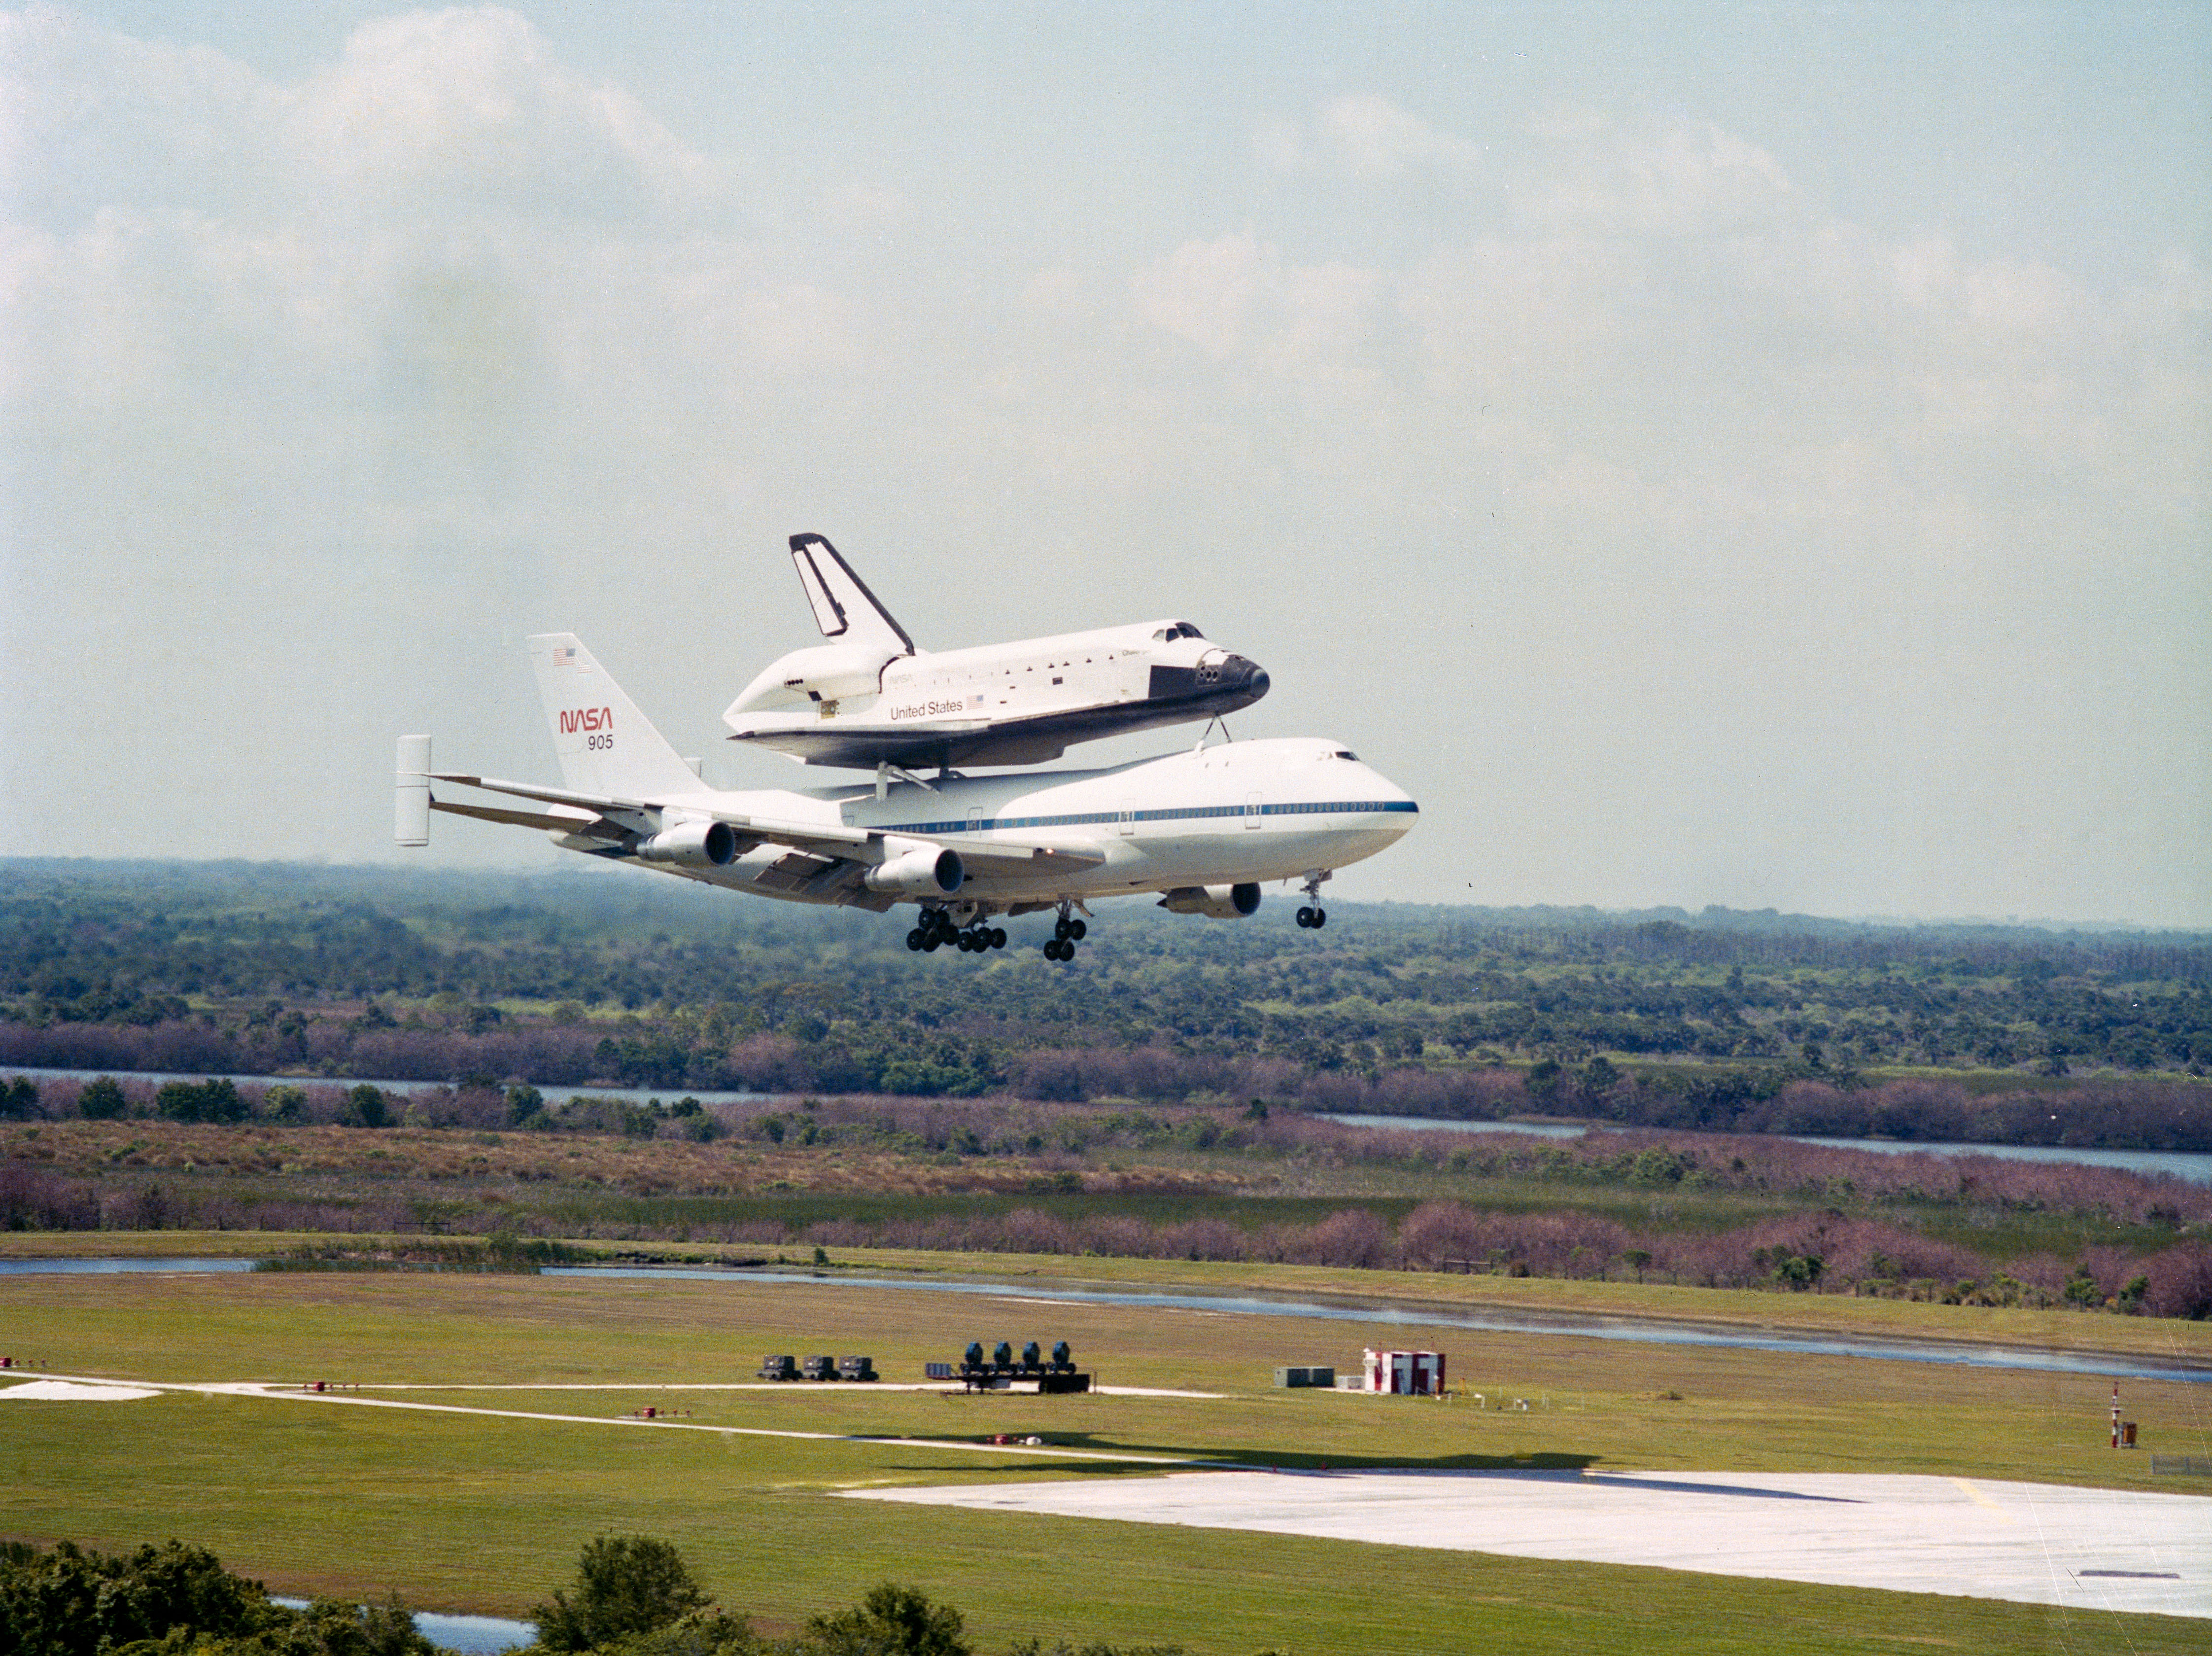 Space shuttle Challenger arrives back at NASA's Kennedy Space Center in Florida atop a Shuttle Carrier Aircraft